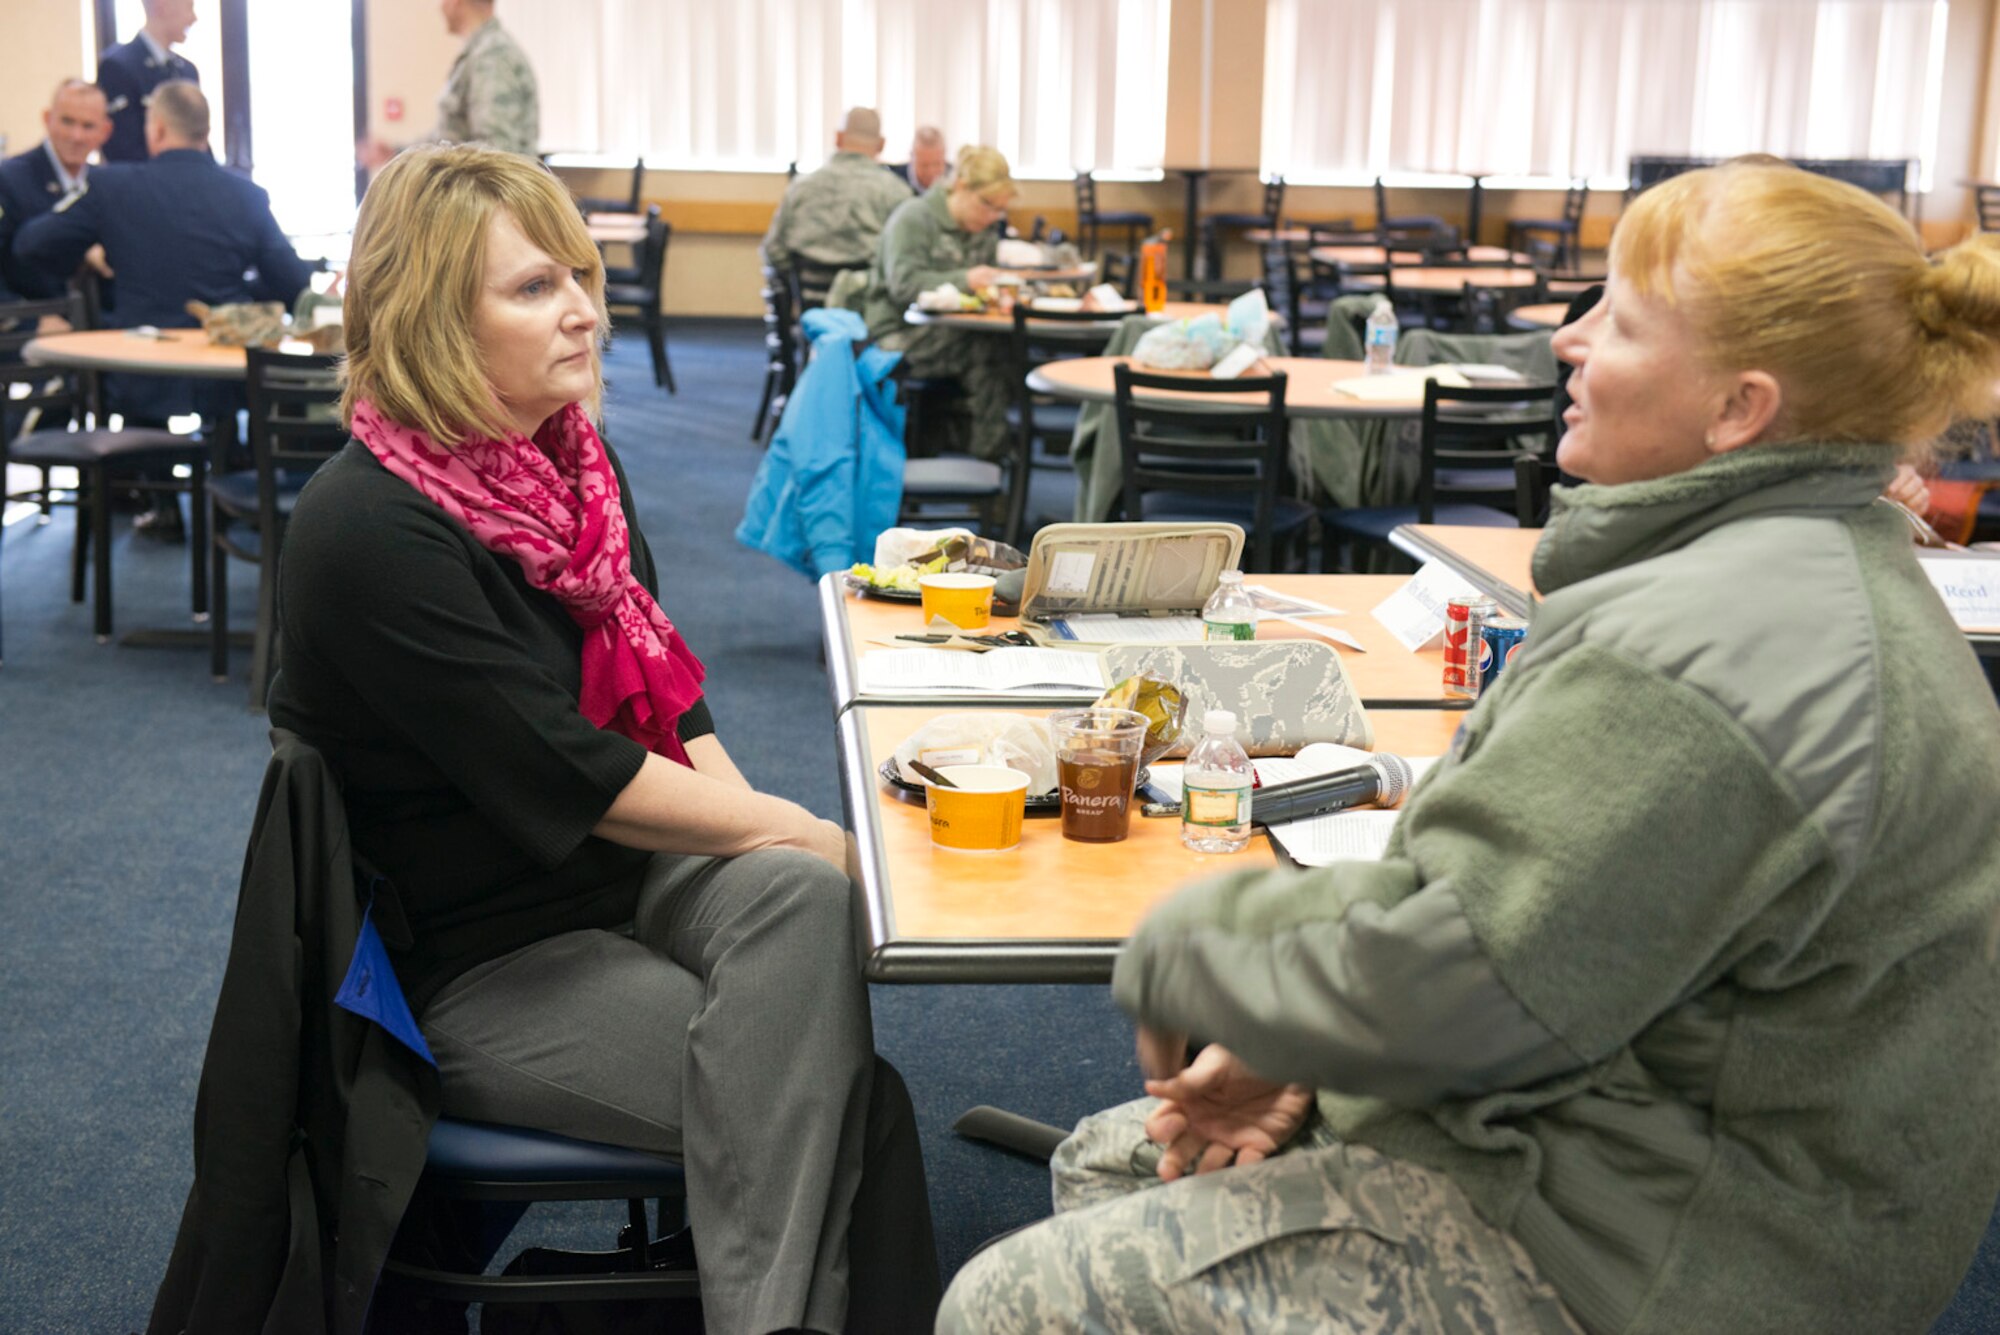 Marie Hotaling,left, wife of Chief Master Sgt. James Hotaling, Command Chief of the Air National Guard discusses childcare services for unit members with Master Sgt. Donna Sliger during a visit to the 167th Airlift Wing Jan. 31. The trip was geared toward identifying challenges facing Airmen and their families. (Air National Guard photo by Master Sgt. Emily Beightol-Deyerle) 